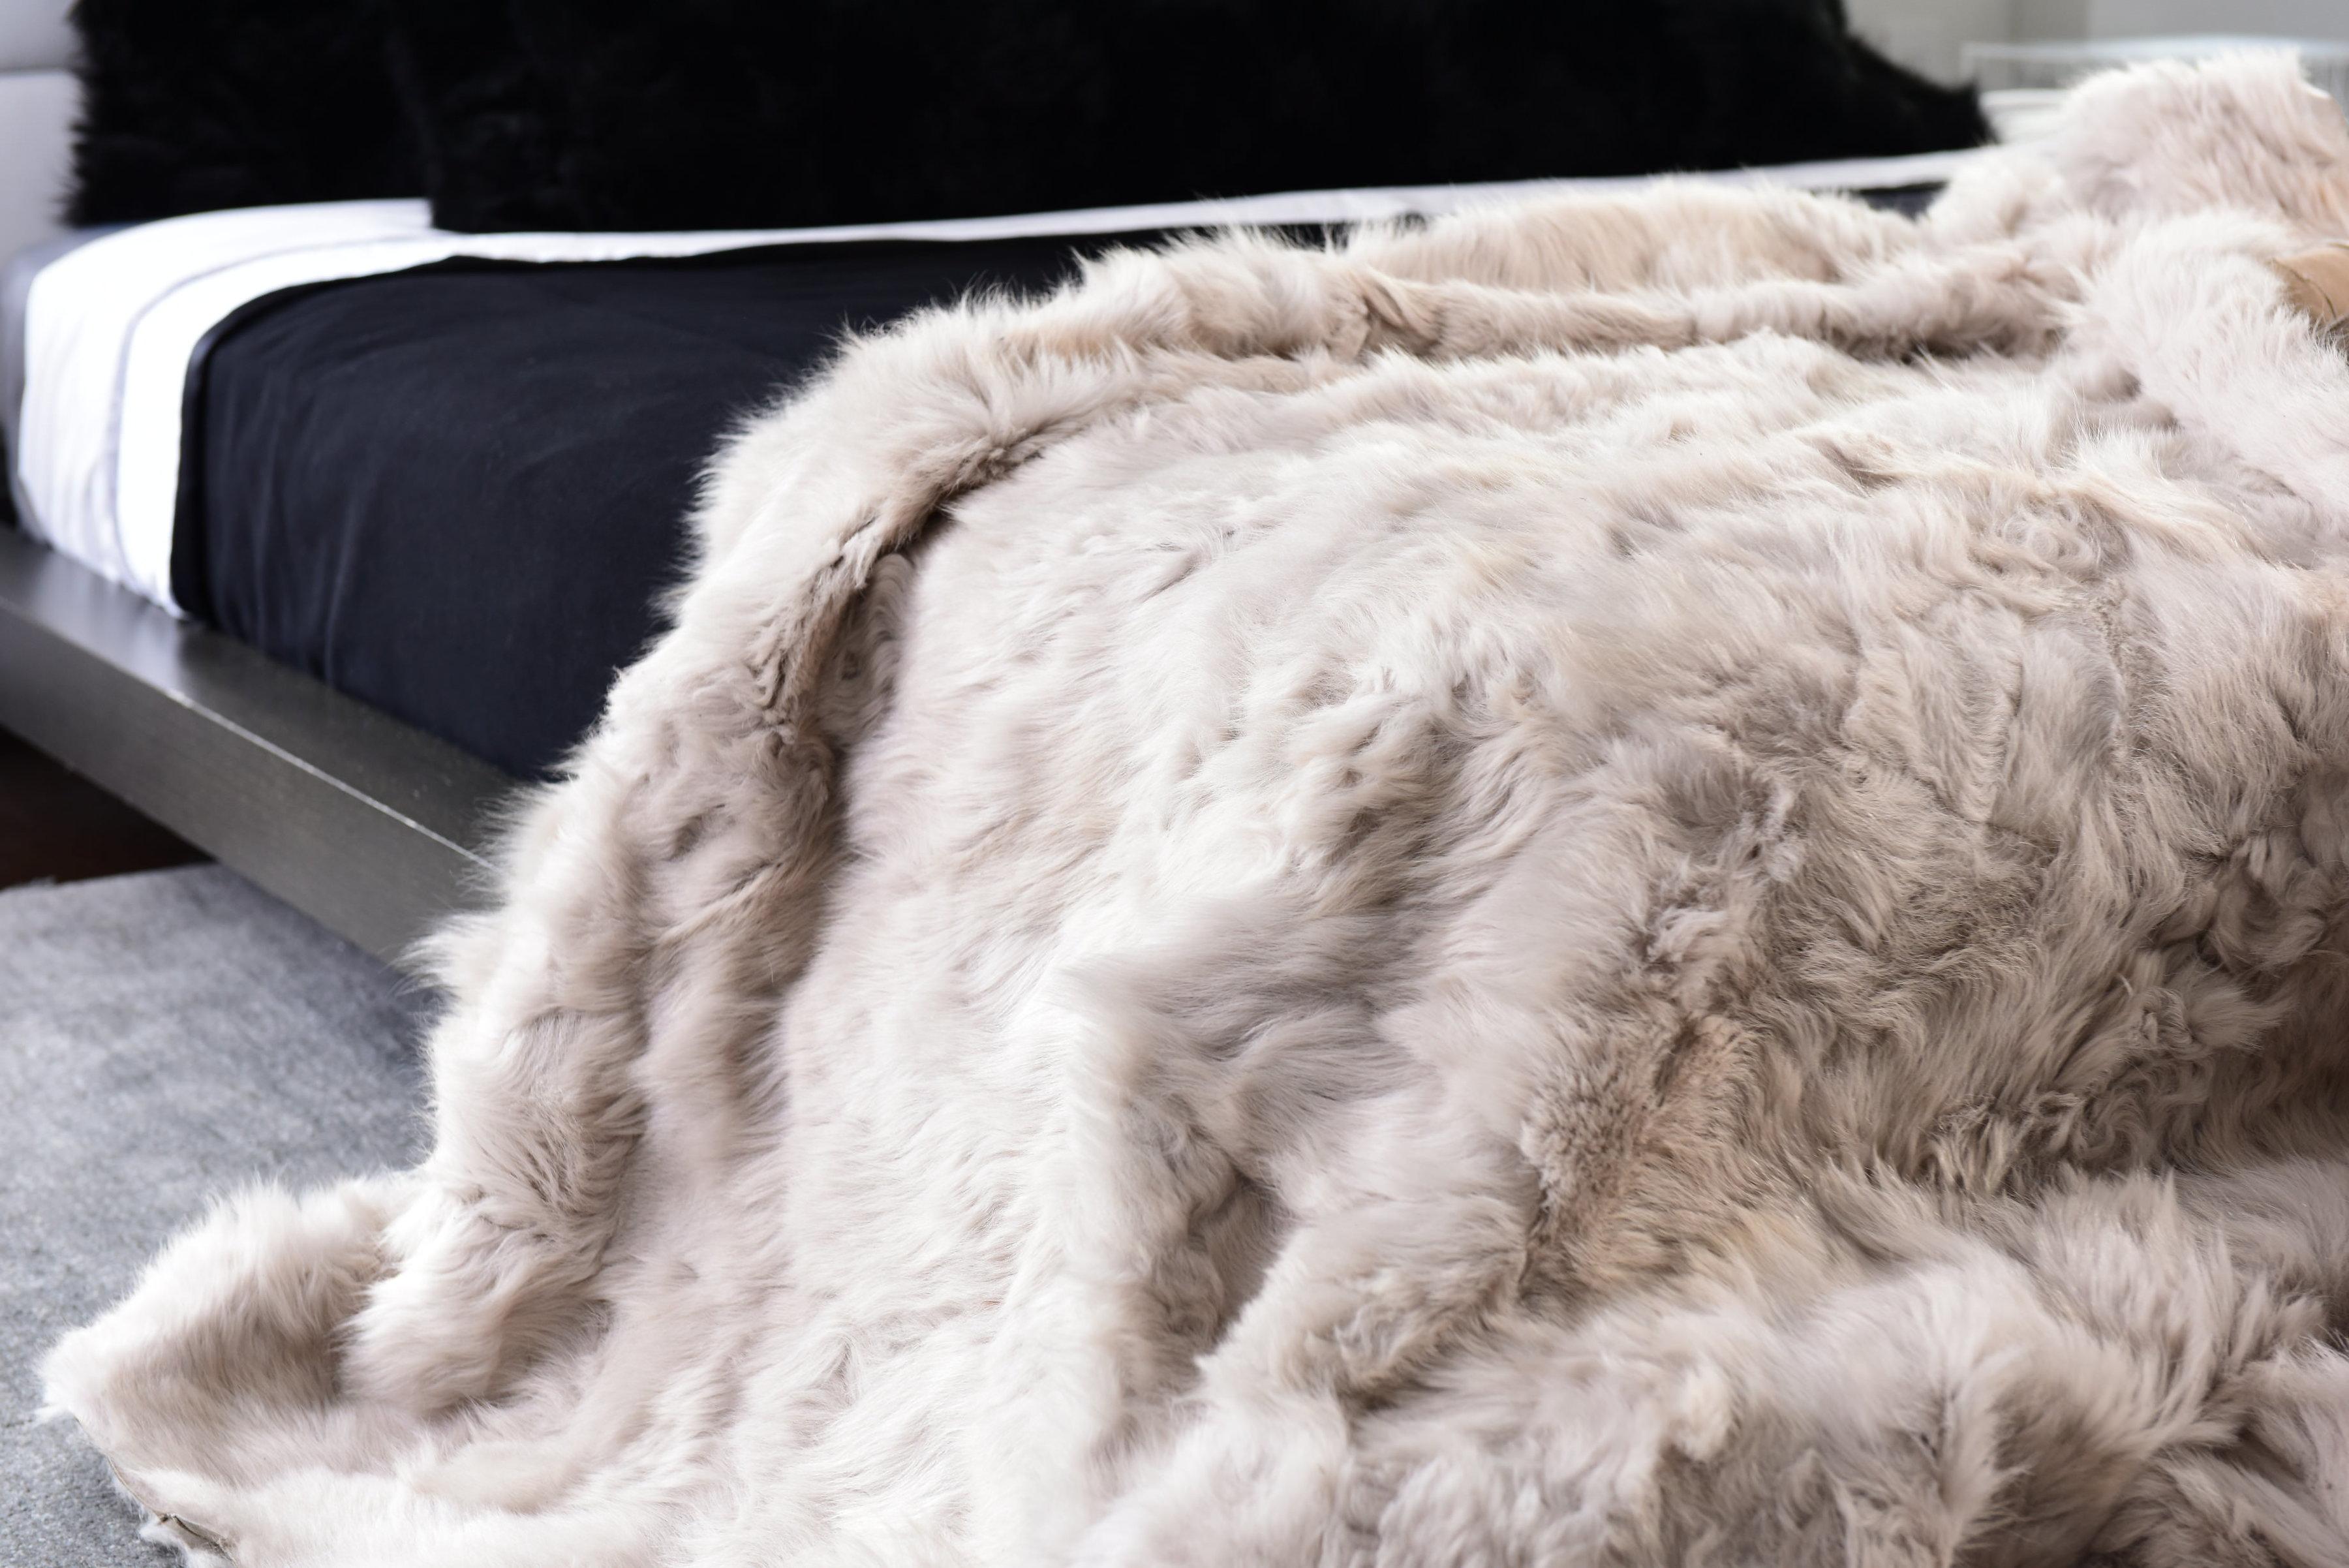 Soft, warm authentic Toscana sheep blanket. 100% Toscana sheep fur from Spain, this one-of-a-kind piece is sewn from Italian glove company remnants. 

Each piece has its own unique character and no two will be exactly alike. We inspect every inch,